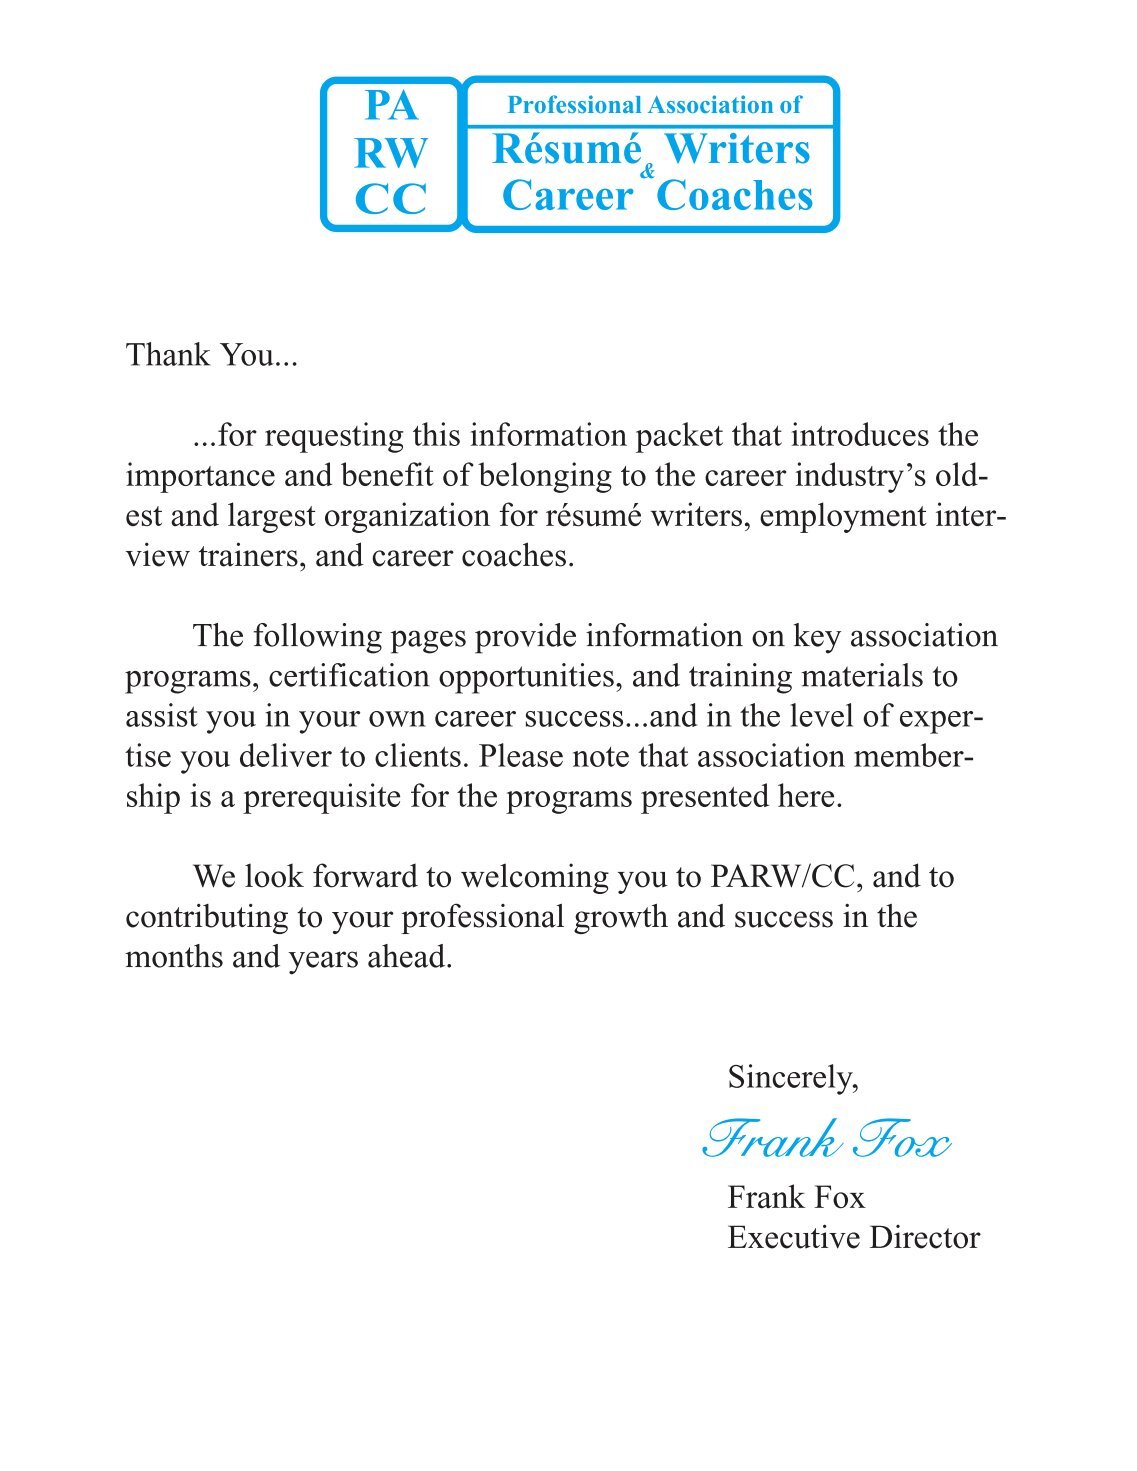 Professional association resume writers career coaches